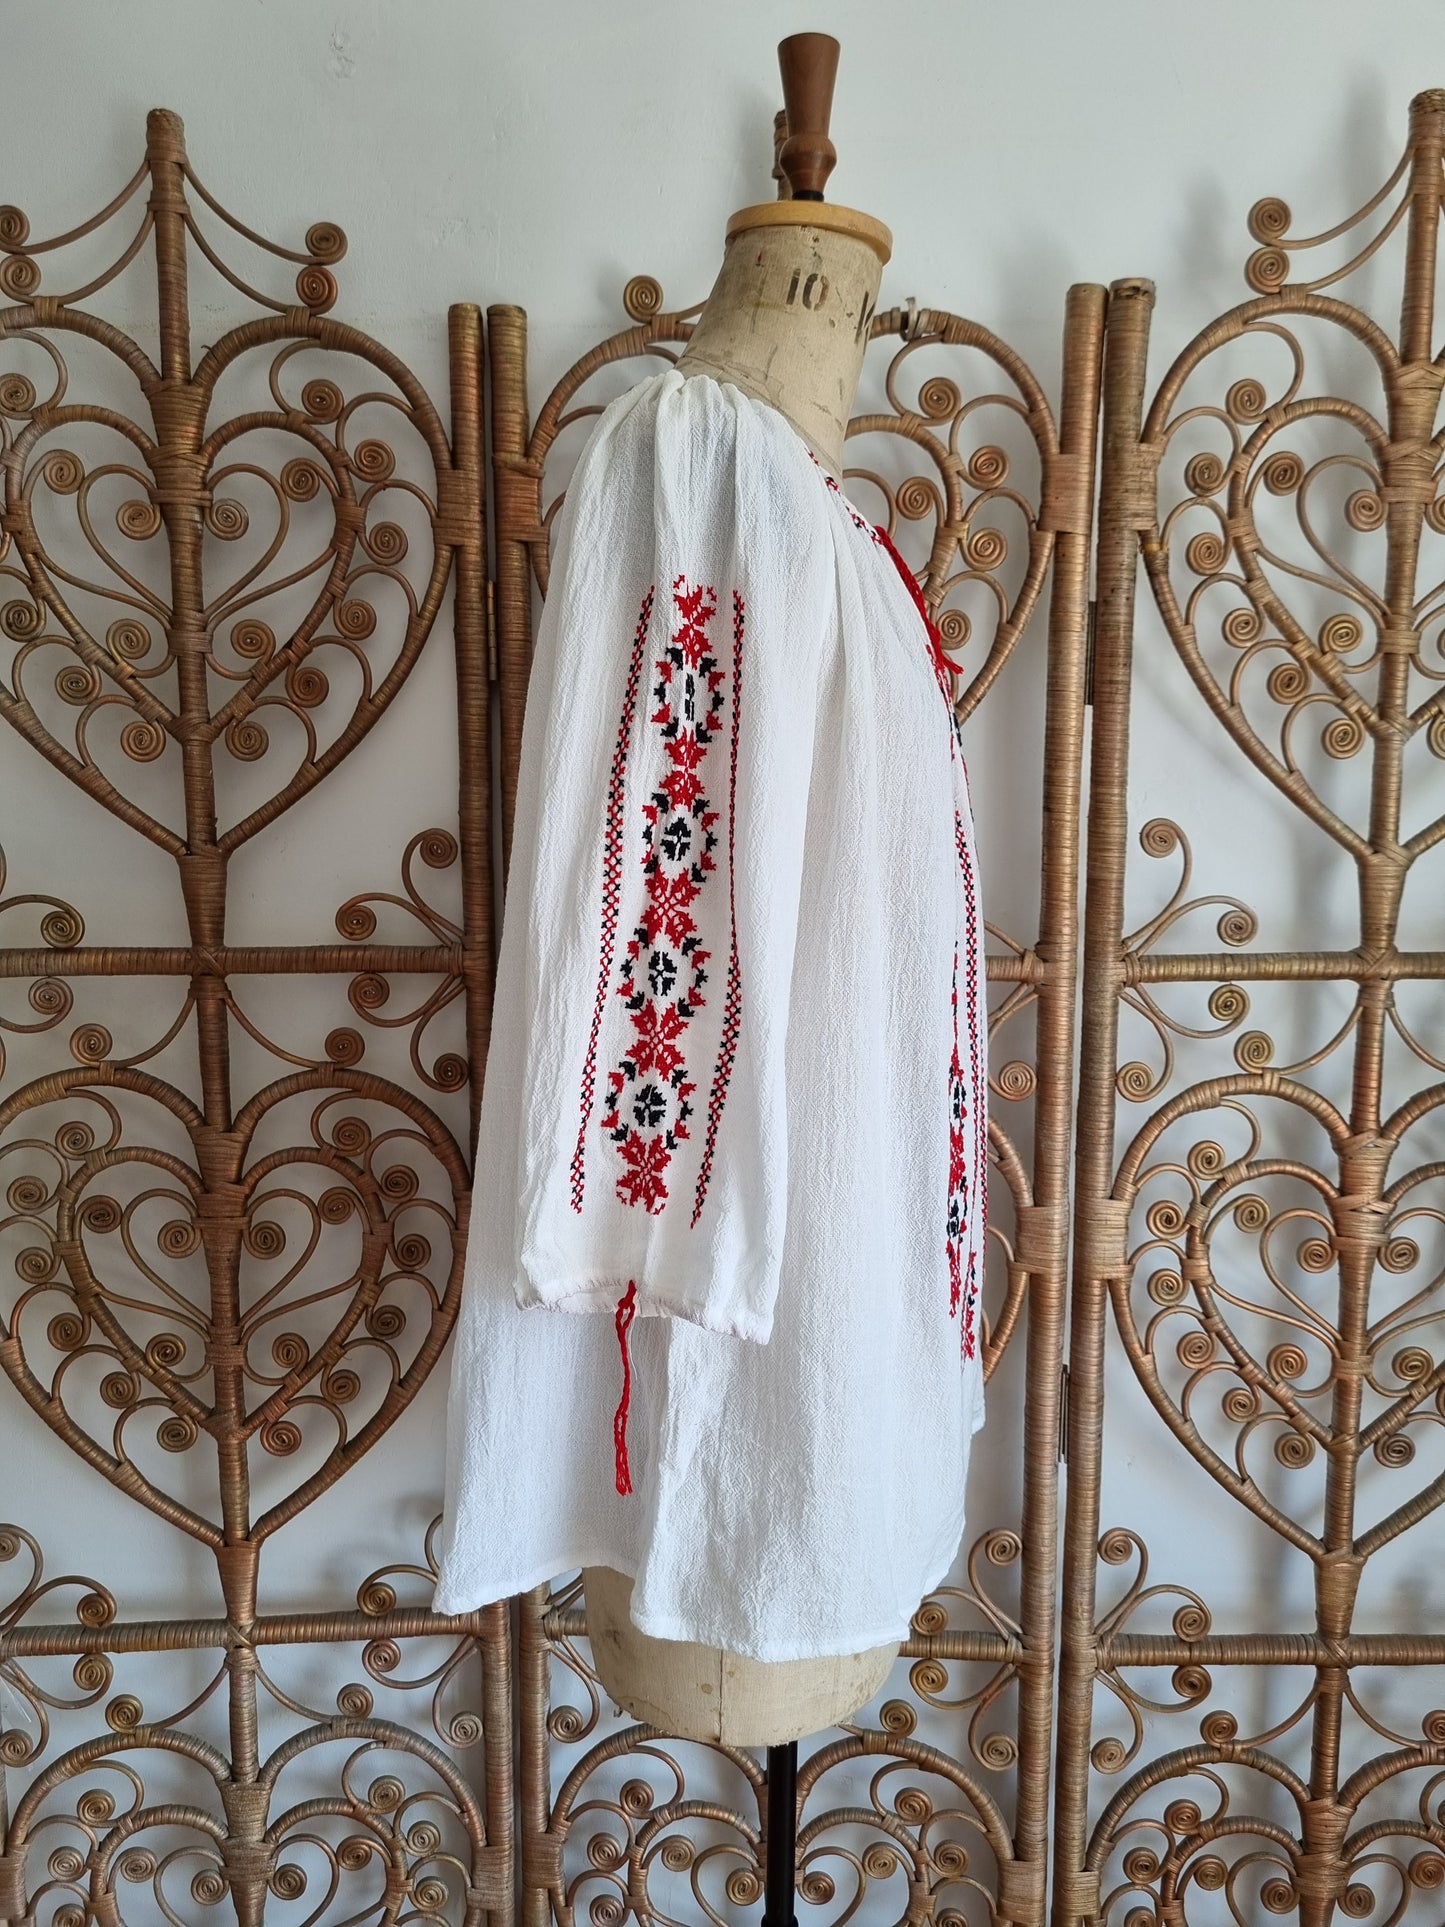 Vintage cotton cheesecloth blouse